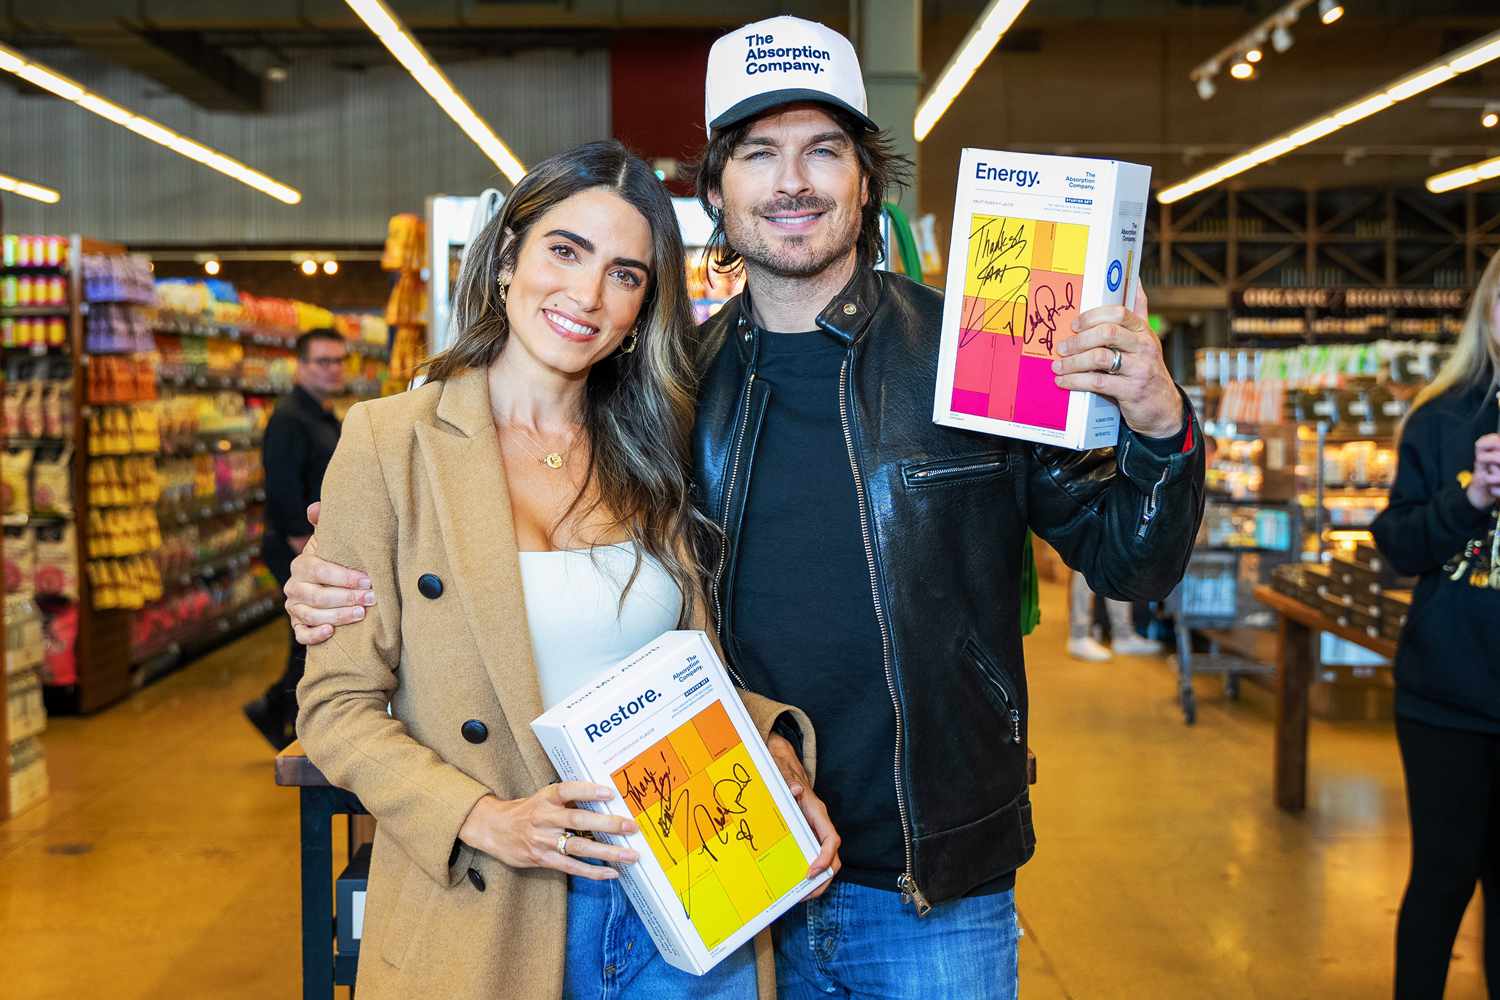 Ian Somerhalder and Nikki Reed celebrate the launch of The Absorption Company, their new supplement company, with fans at Erewhon Calabasas. 